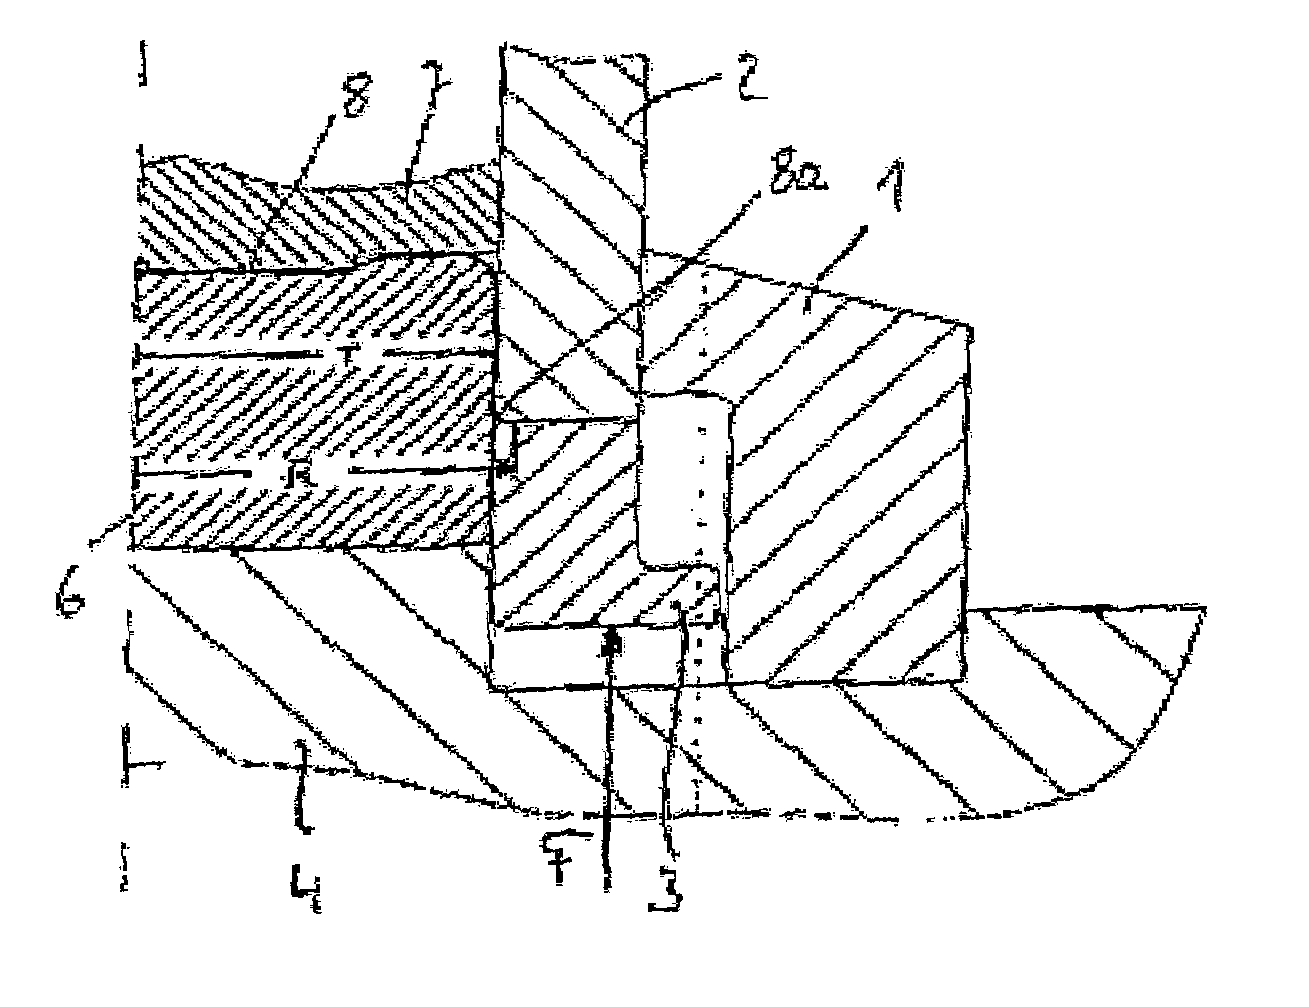 Method for producing a cup-shaped object